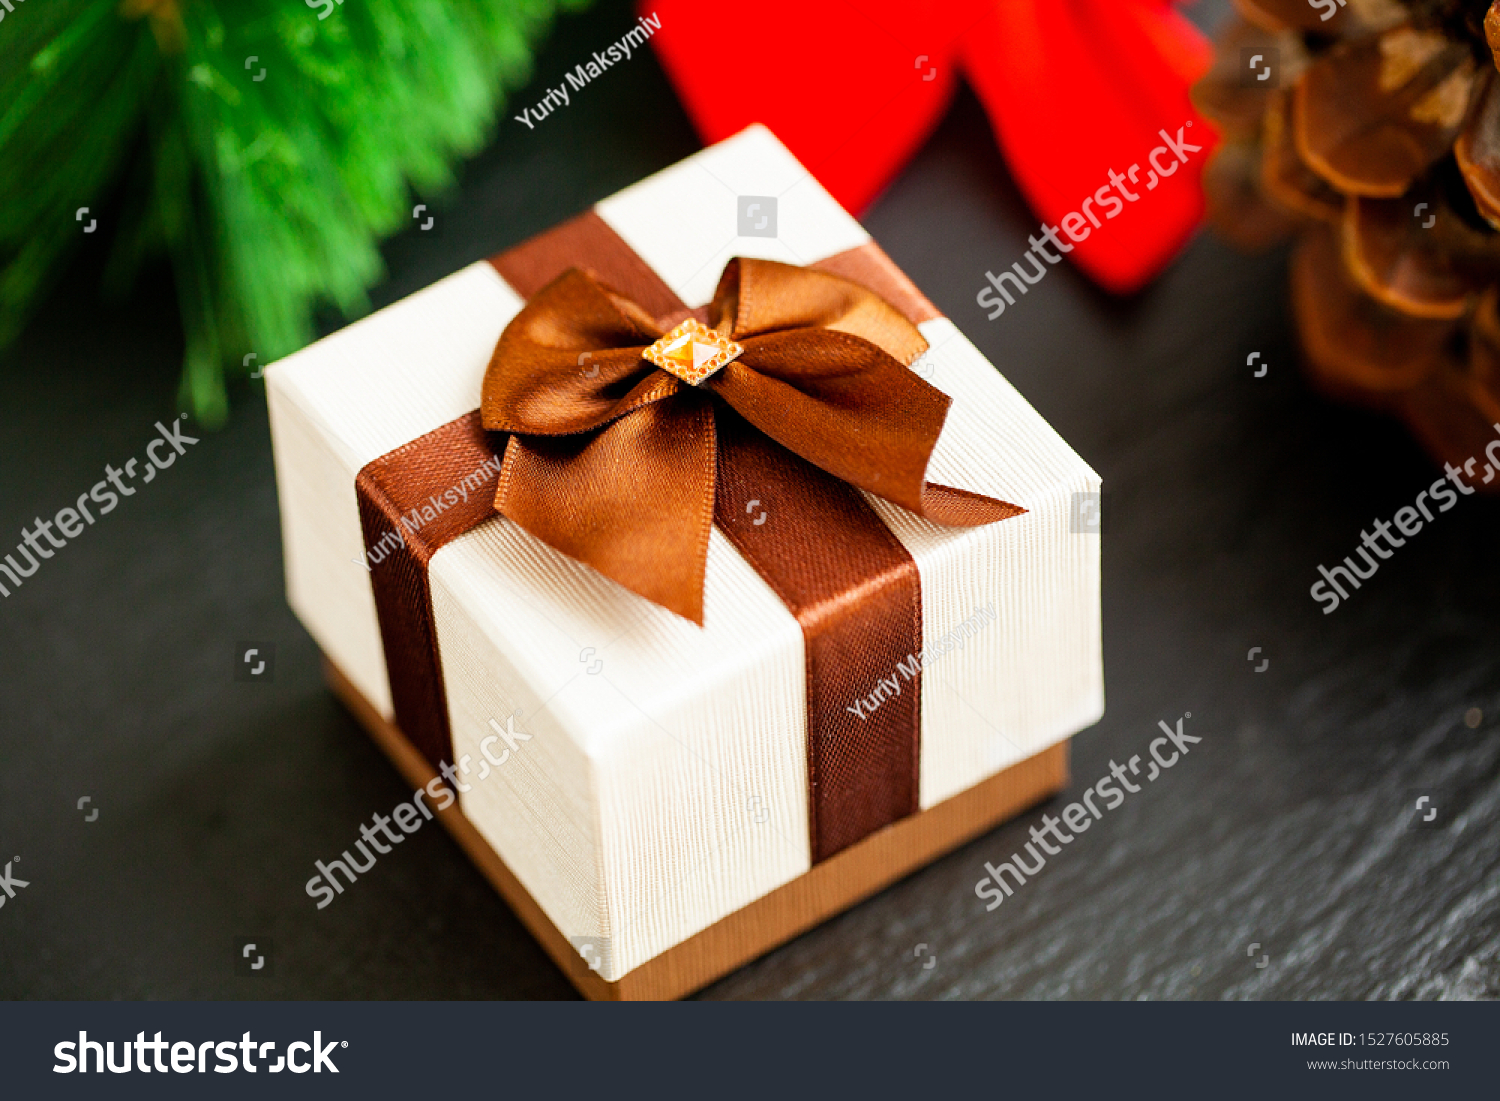 New year gift with christmas decorations on dark background #1527605885